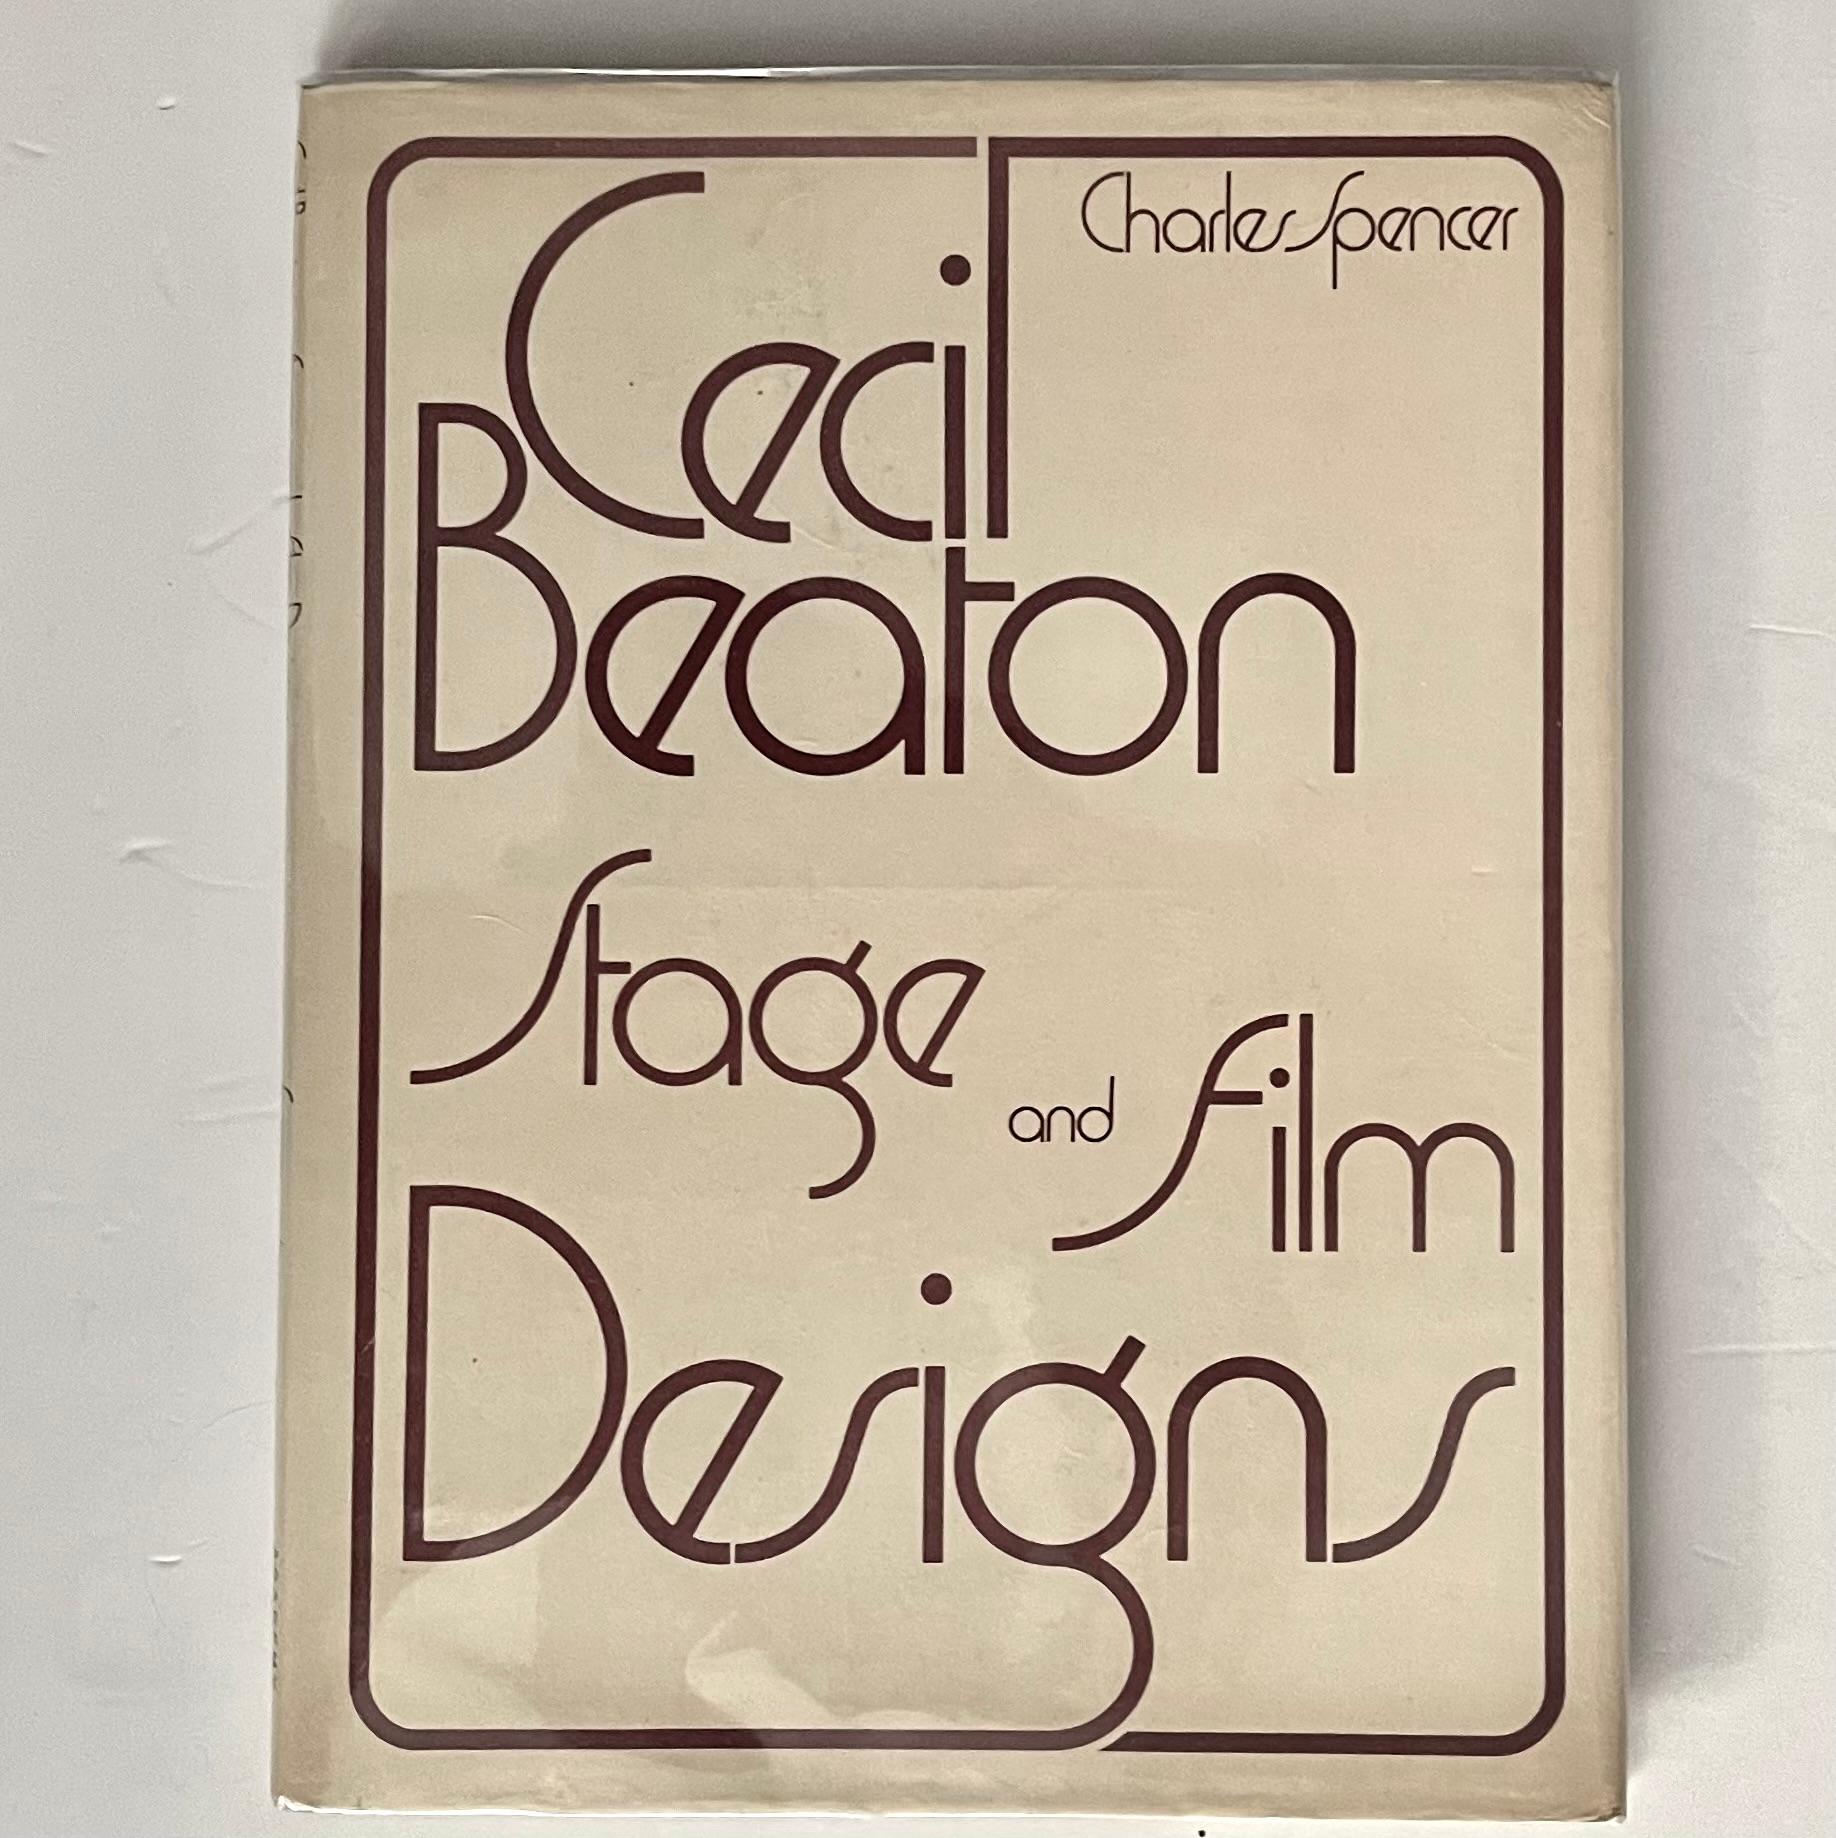 Published by Academy Editions, London & St. Martin’s Press, New York, 1st edition, 1975. Hardback with English text.

Inspired by the Edwardian beau monde, Beaton’s oeuvre as a stage and costume designer is often overlooked by virtue of his most